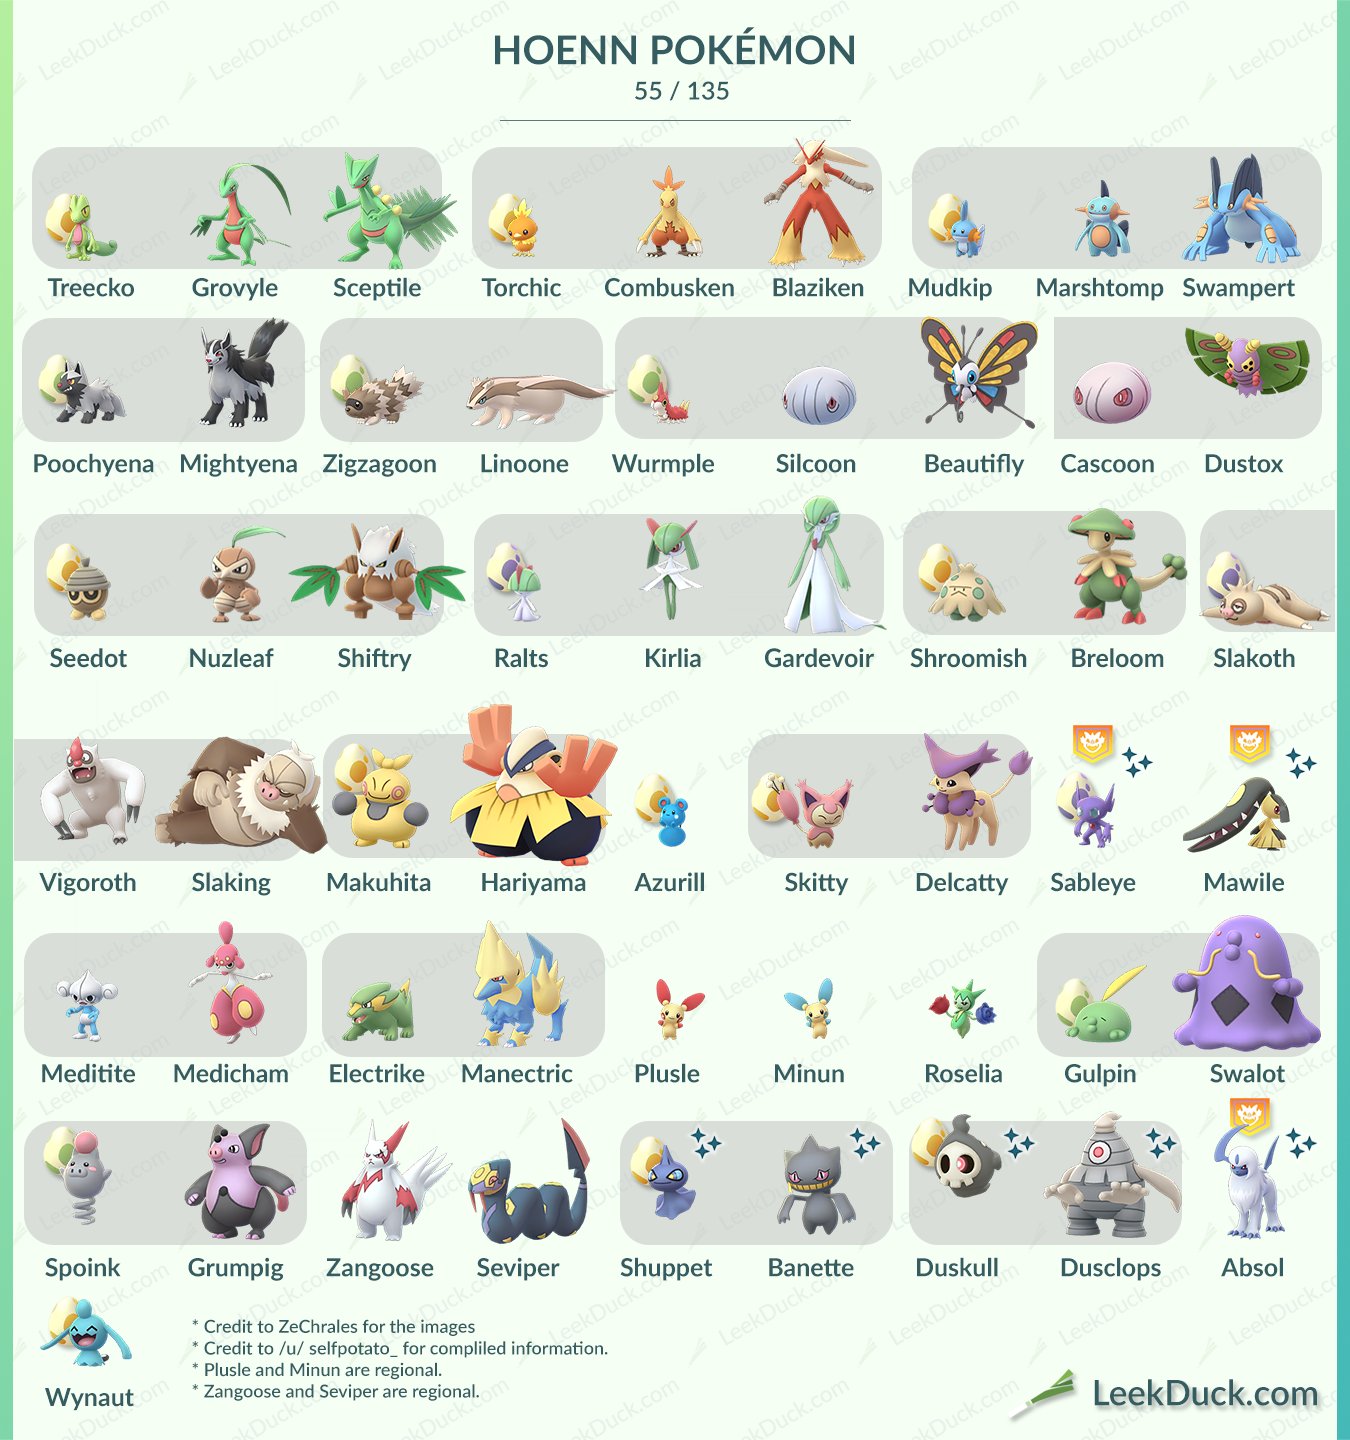 Leek Duck 🦆 on X: Here's an updated look for the remaining Pokemon in  Hoenn Region. This includes the recent wave of 23 Pokemon and Kyogre.  (Light version) #PokemonGo #PokemonGoHoenn  /